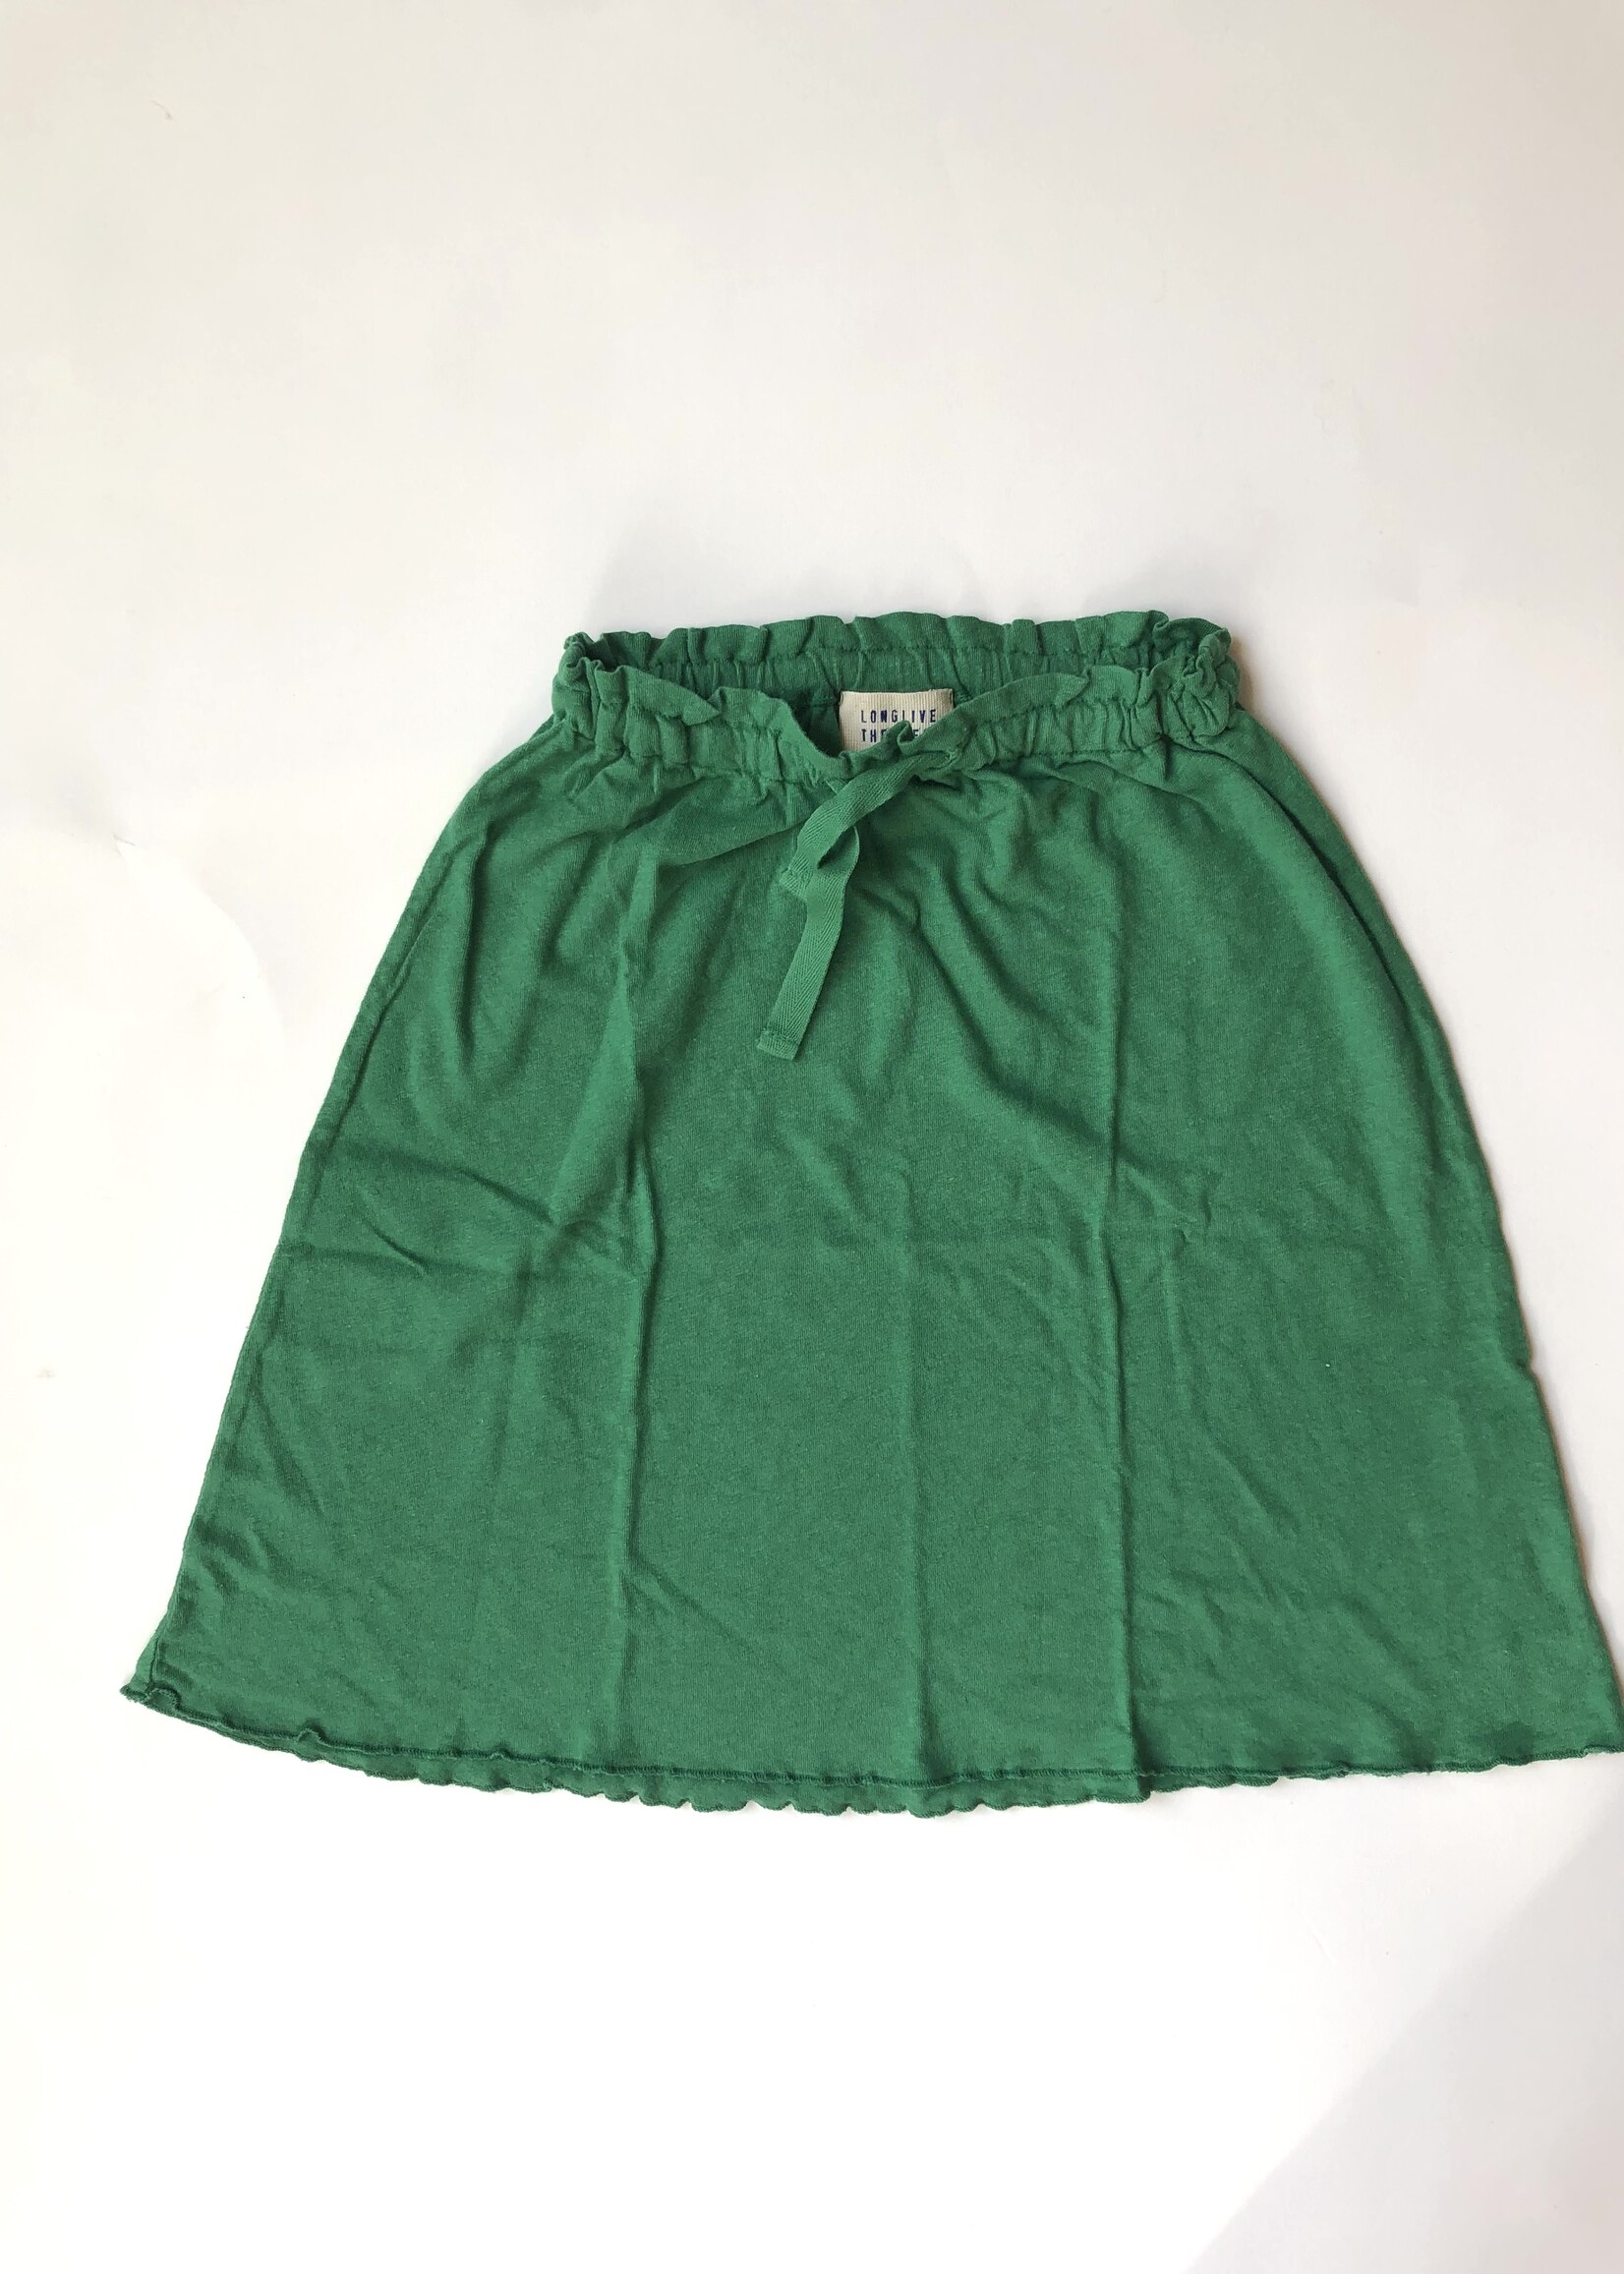 Long Live The Queen Green midi skirt 4y